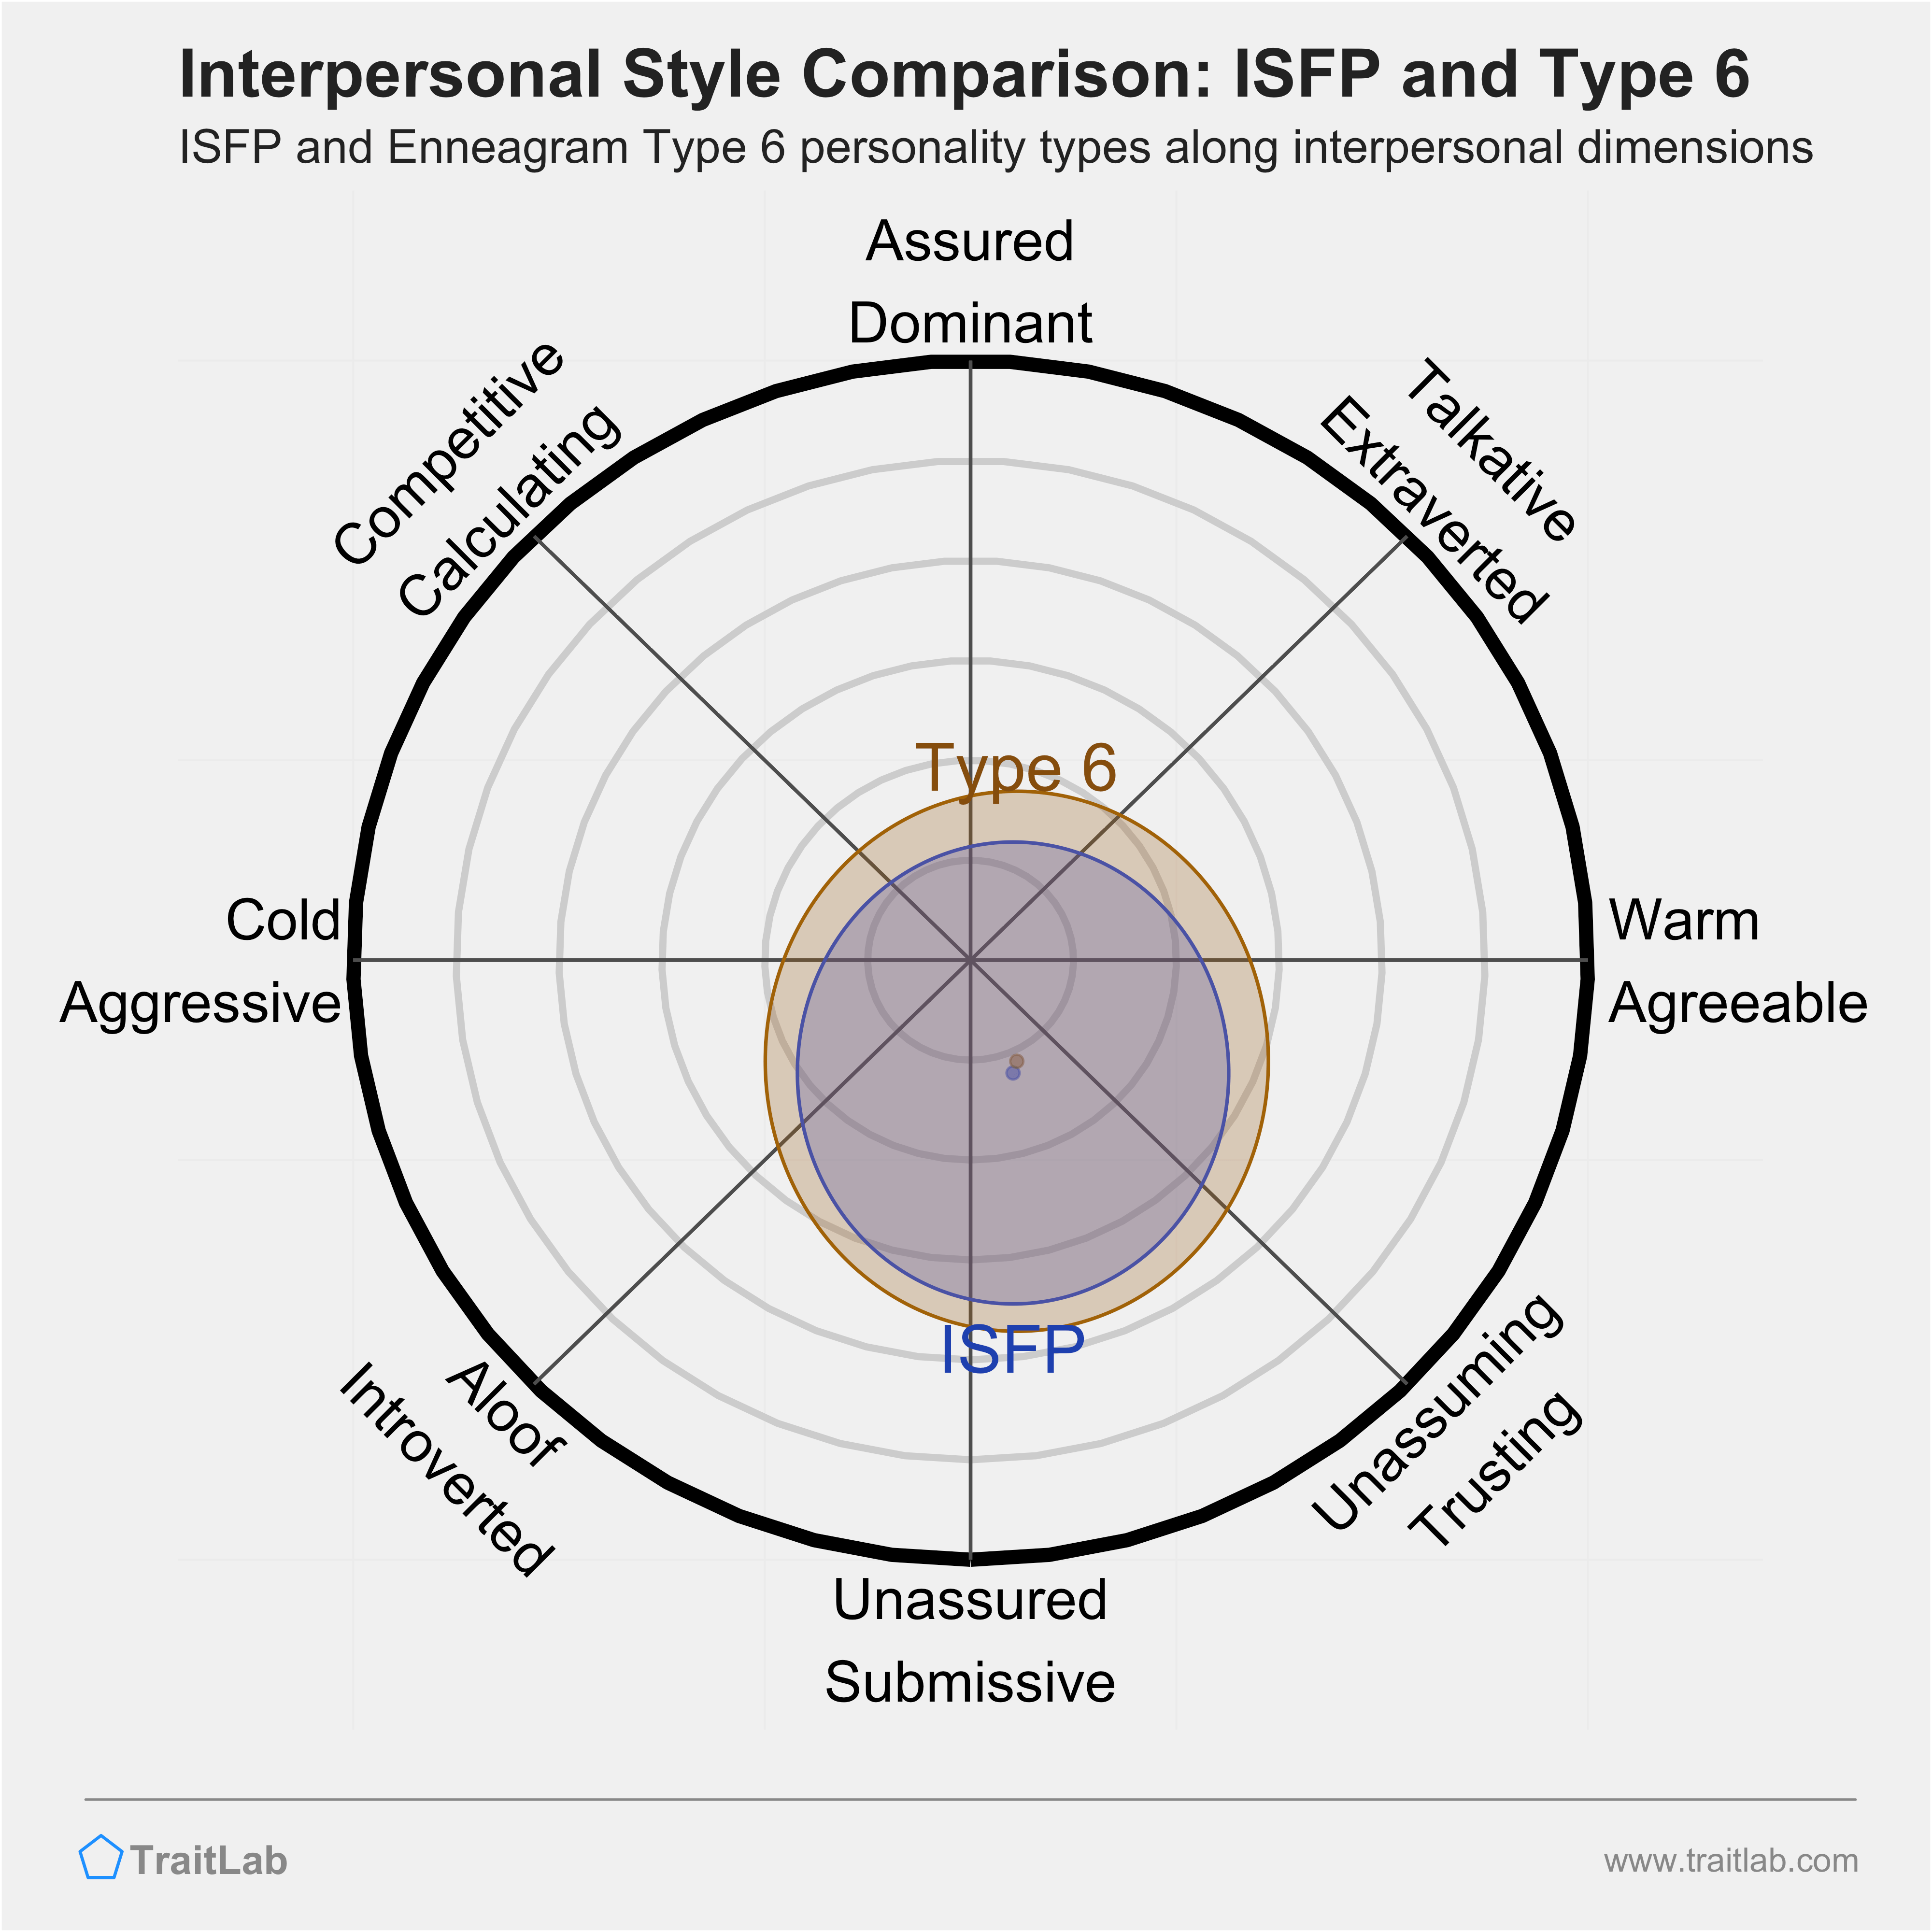 Enneagram ISFP and Type 6 comparison across interpersonal dimensions